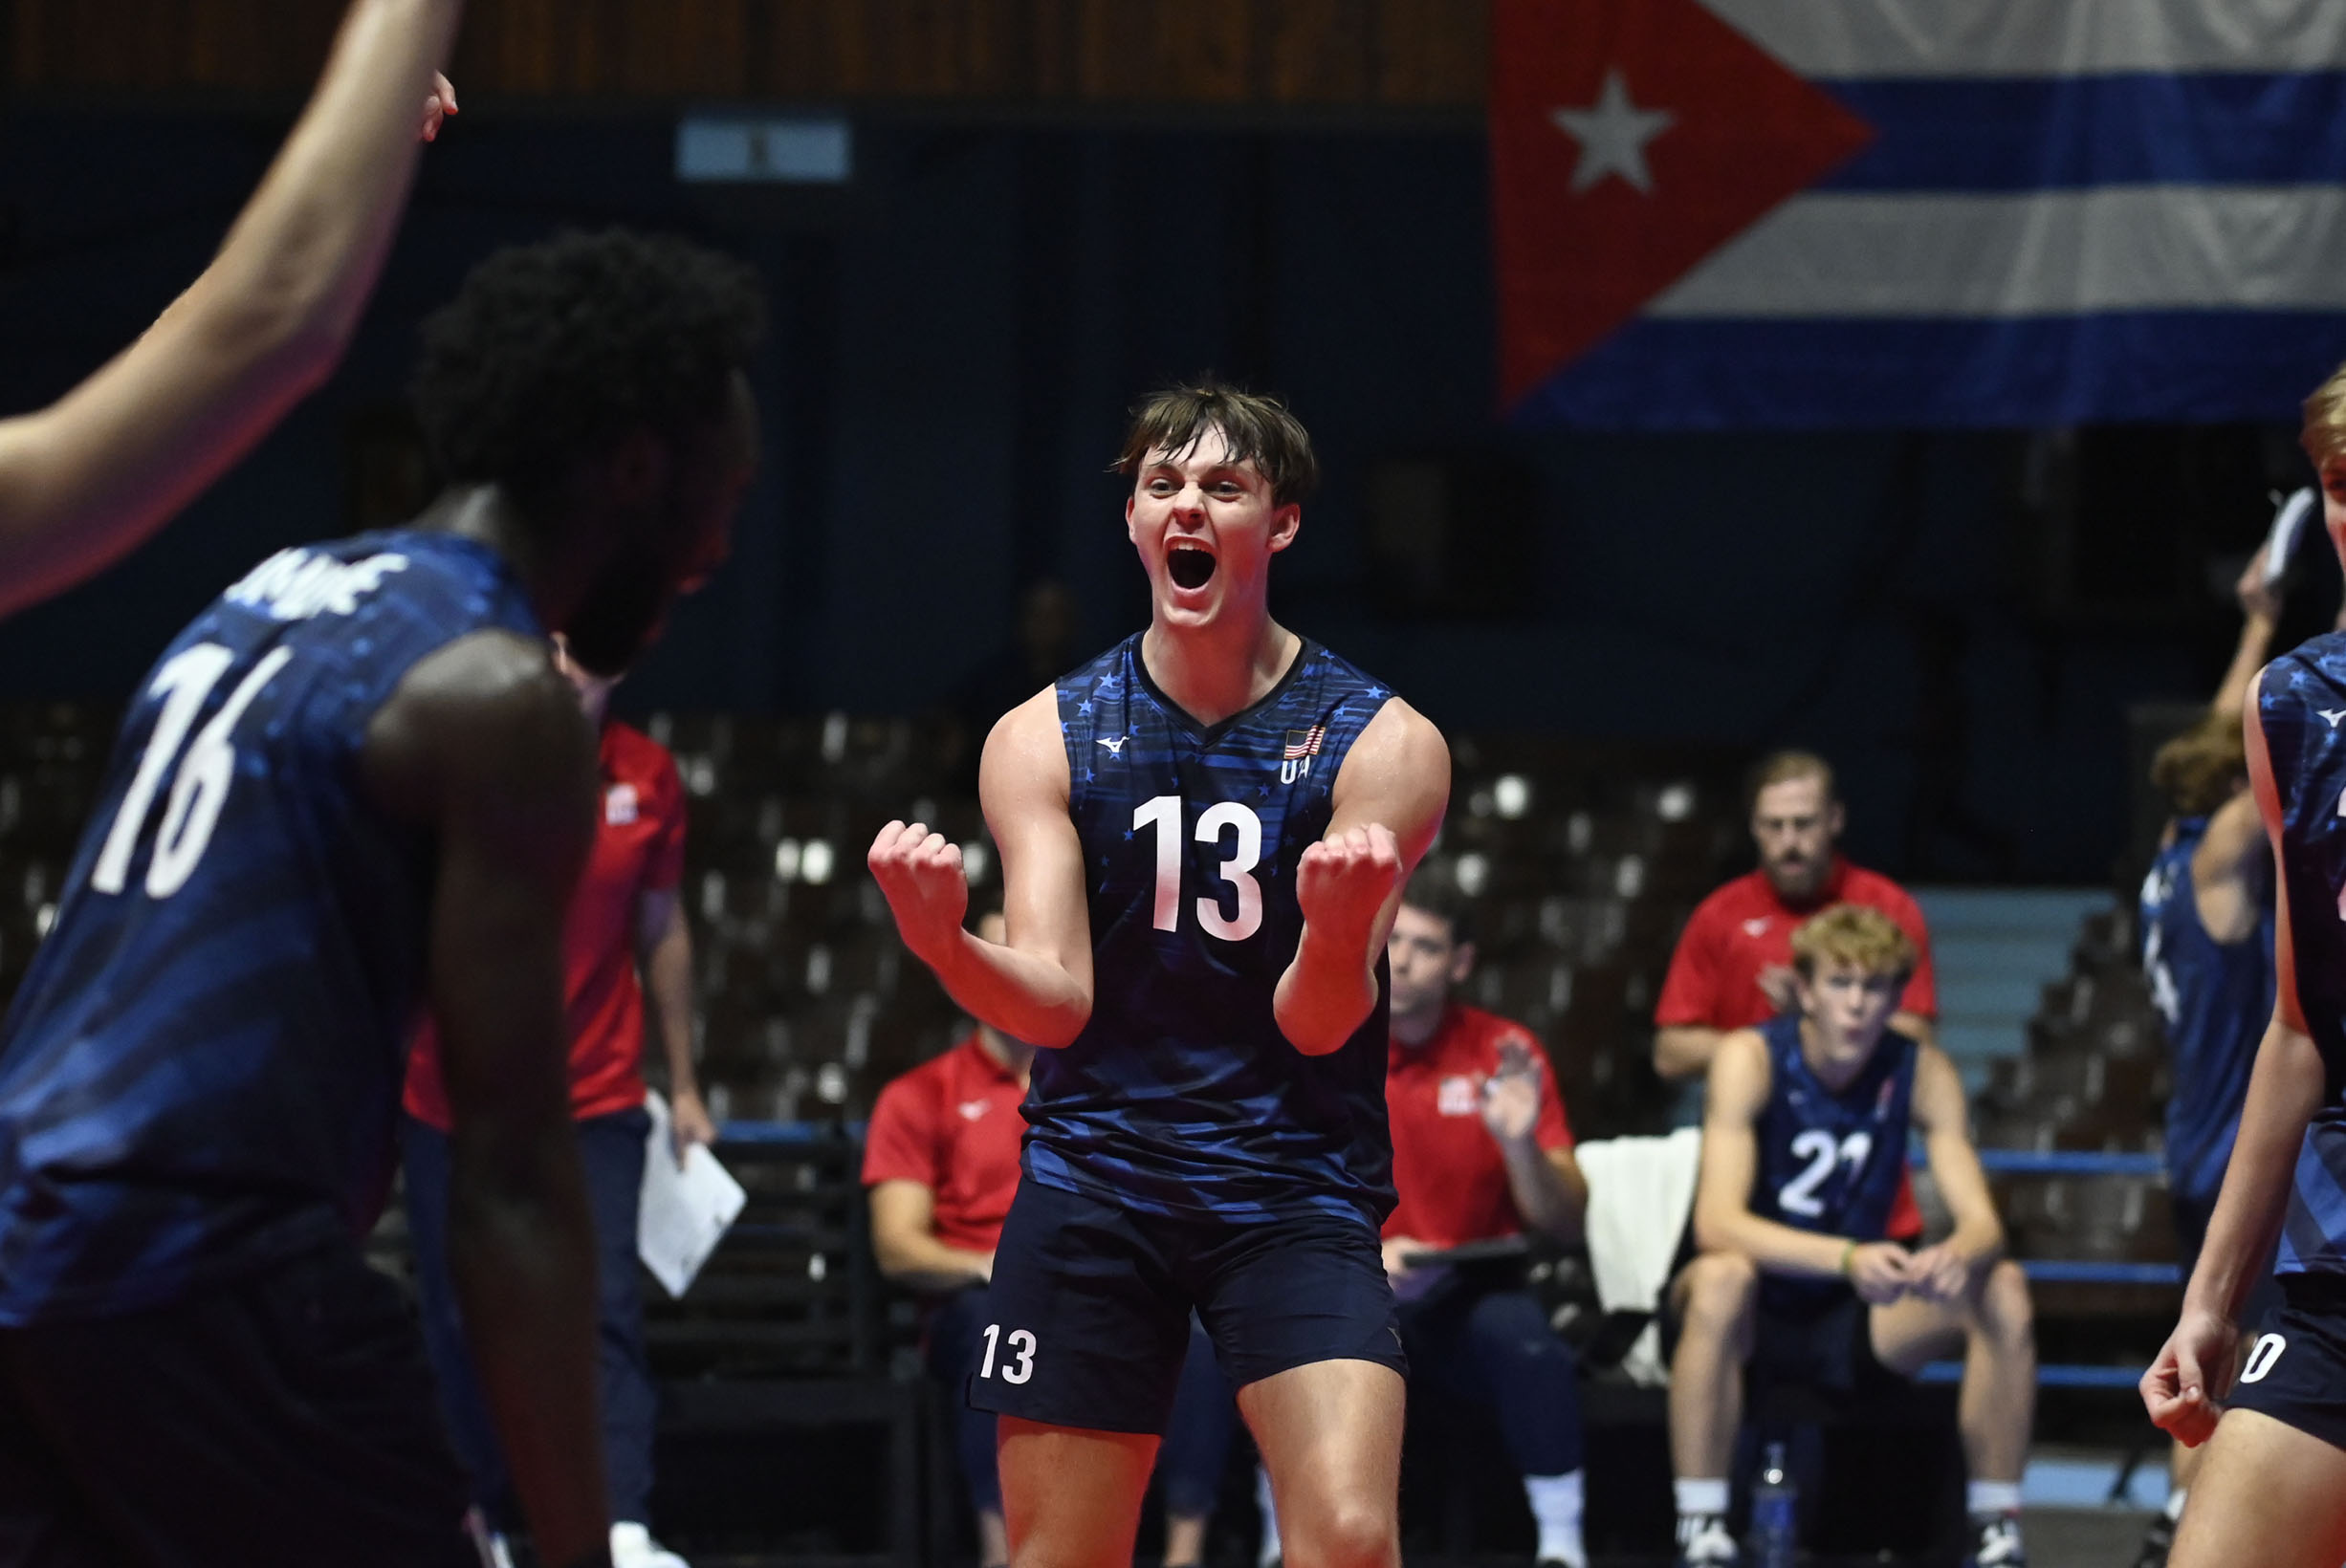 USA won berth to Worlds over Cuba and will play for U21 Pan Am Cup gold